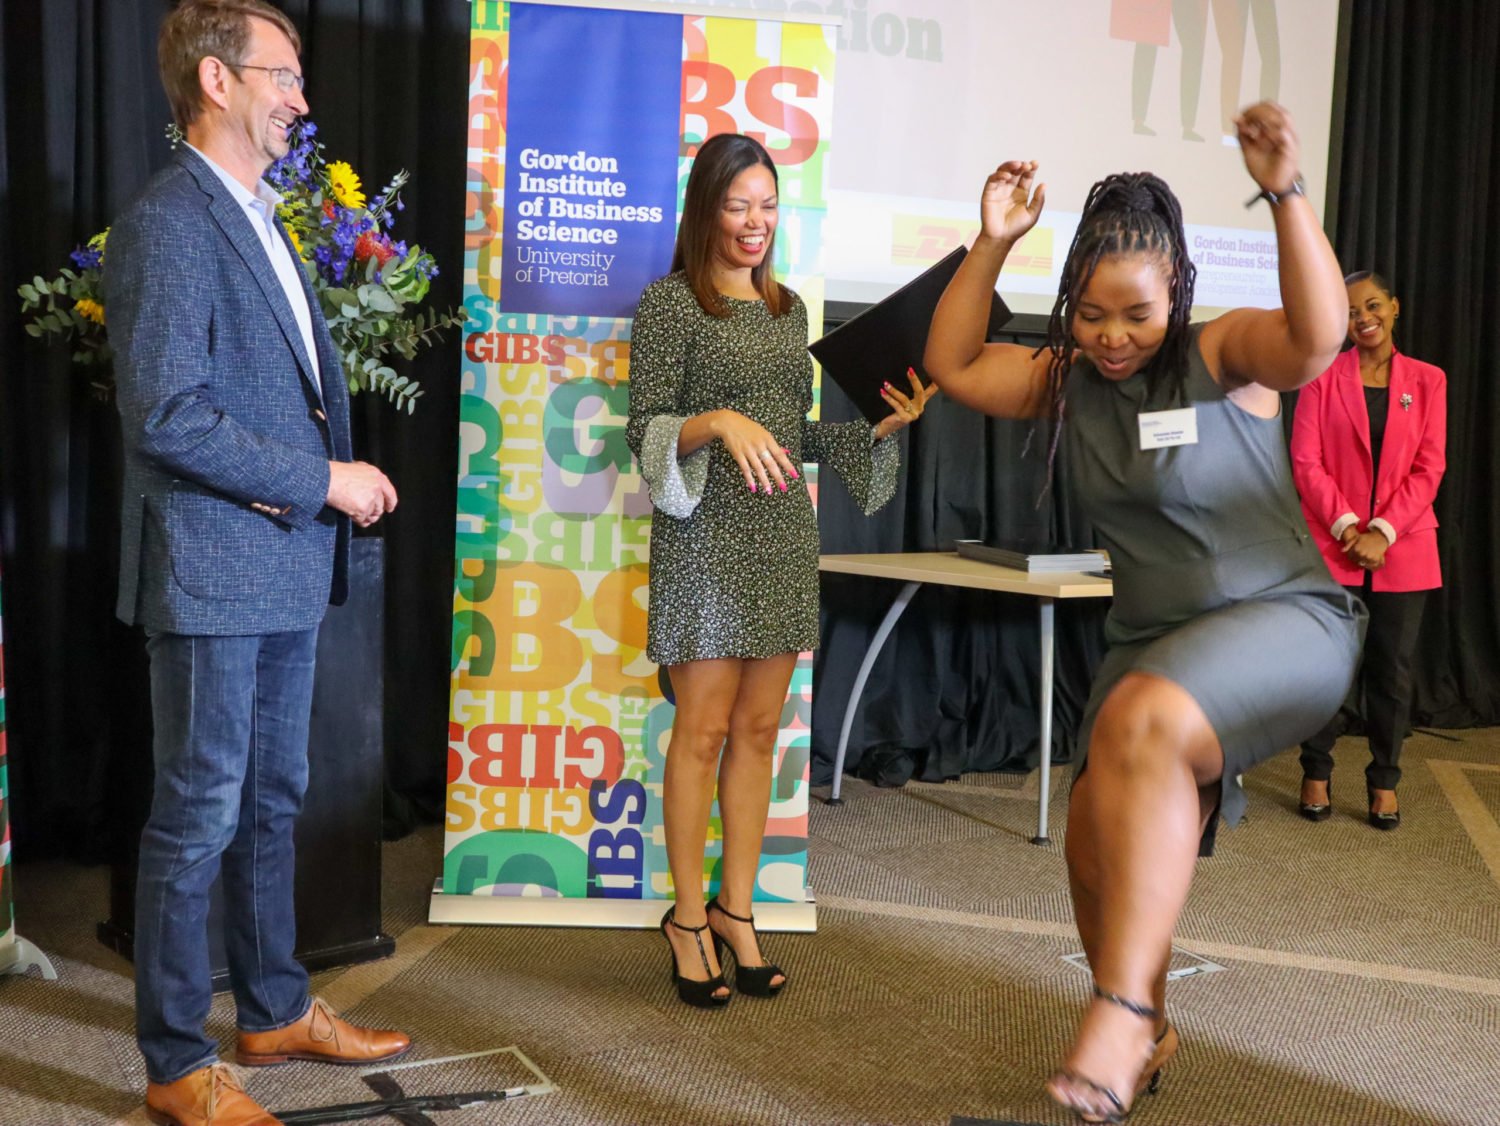 Road to growth graduate dances in celebration